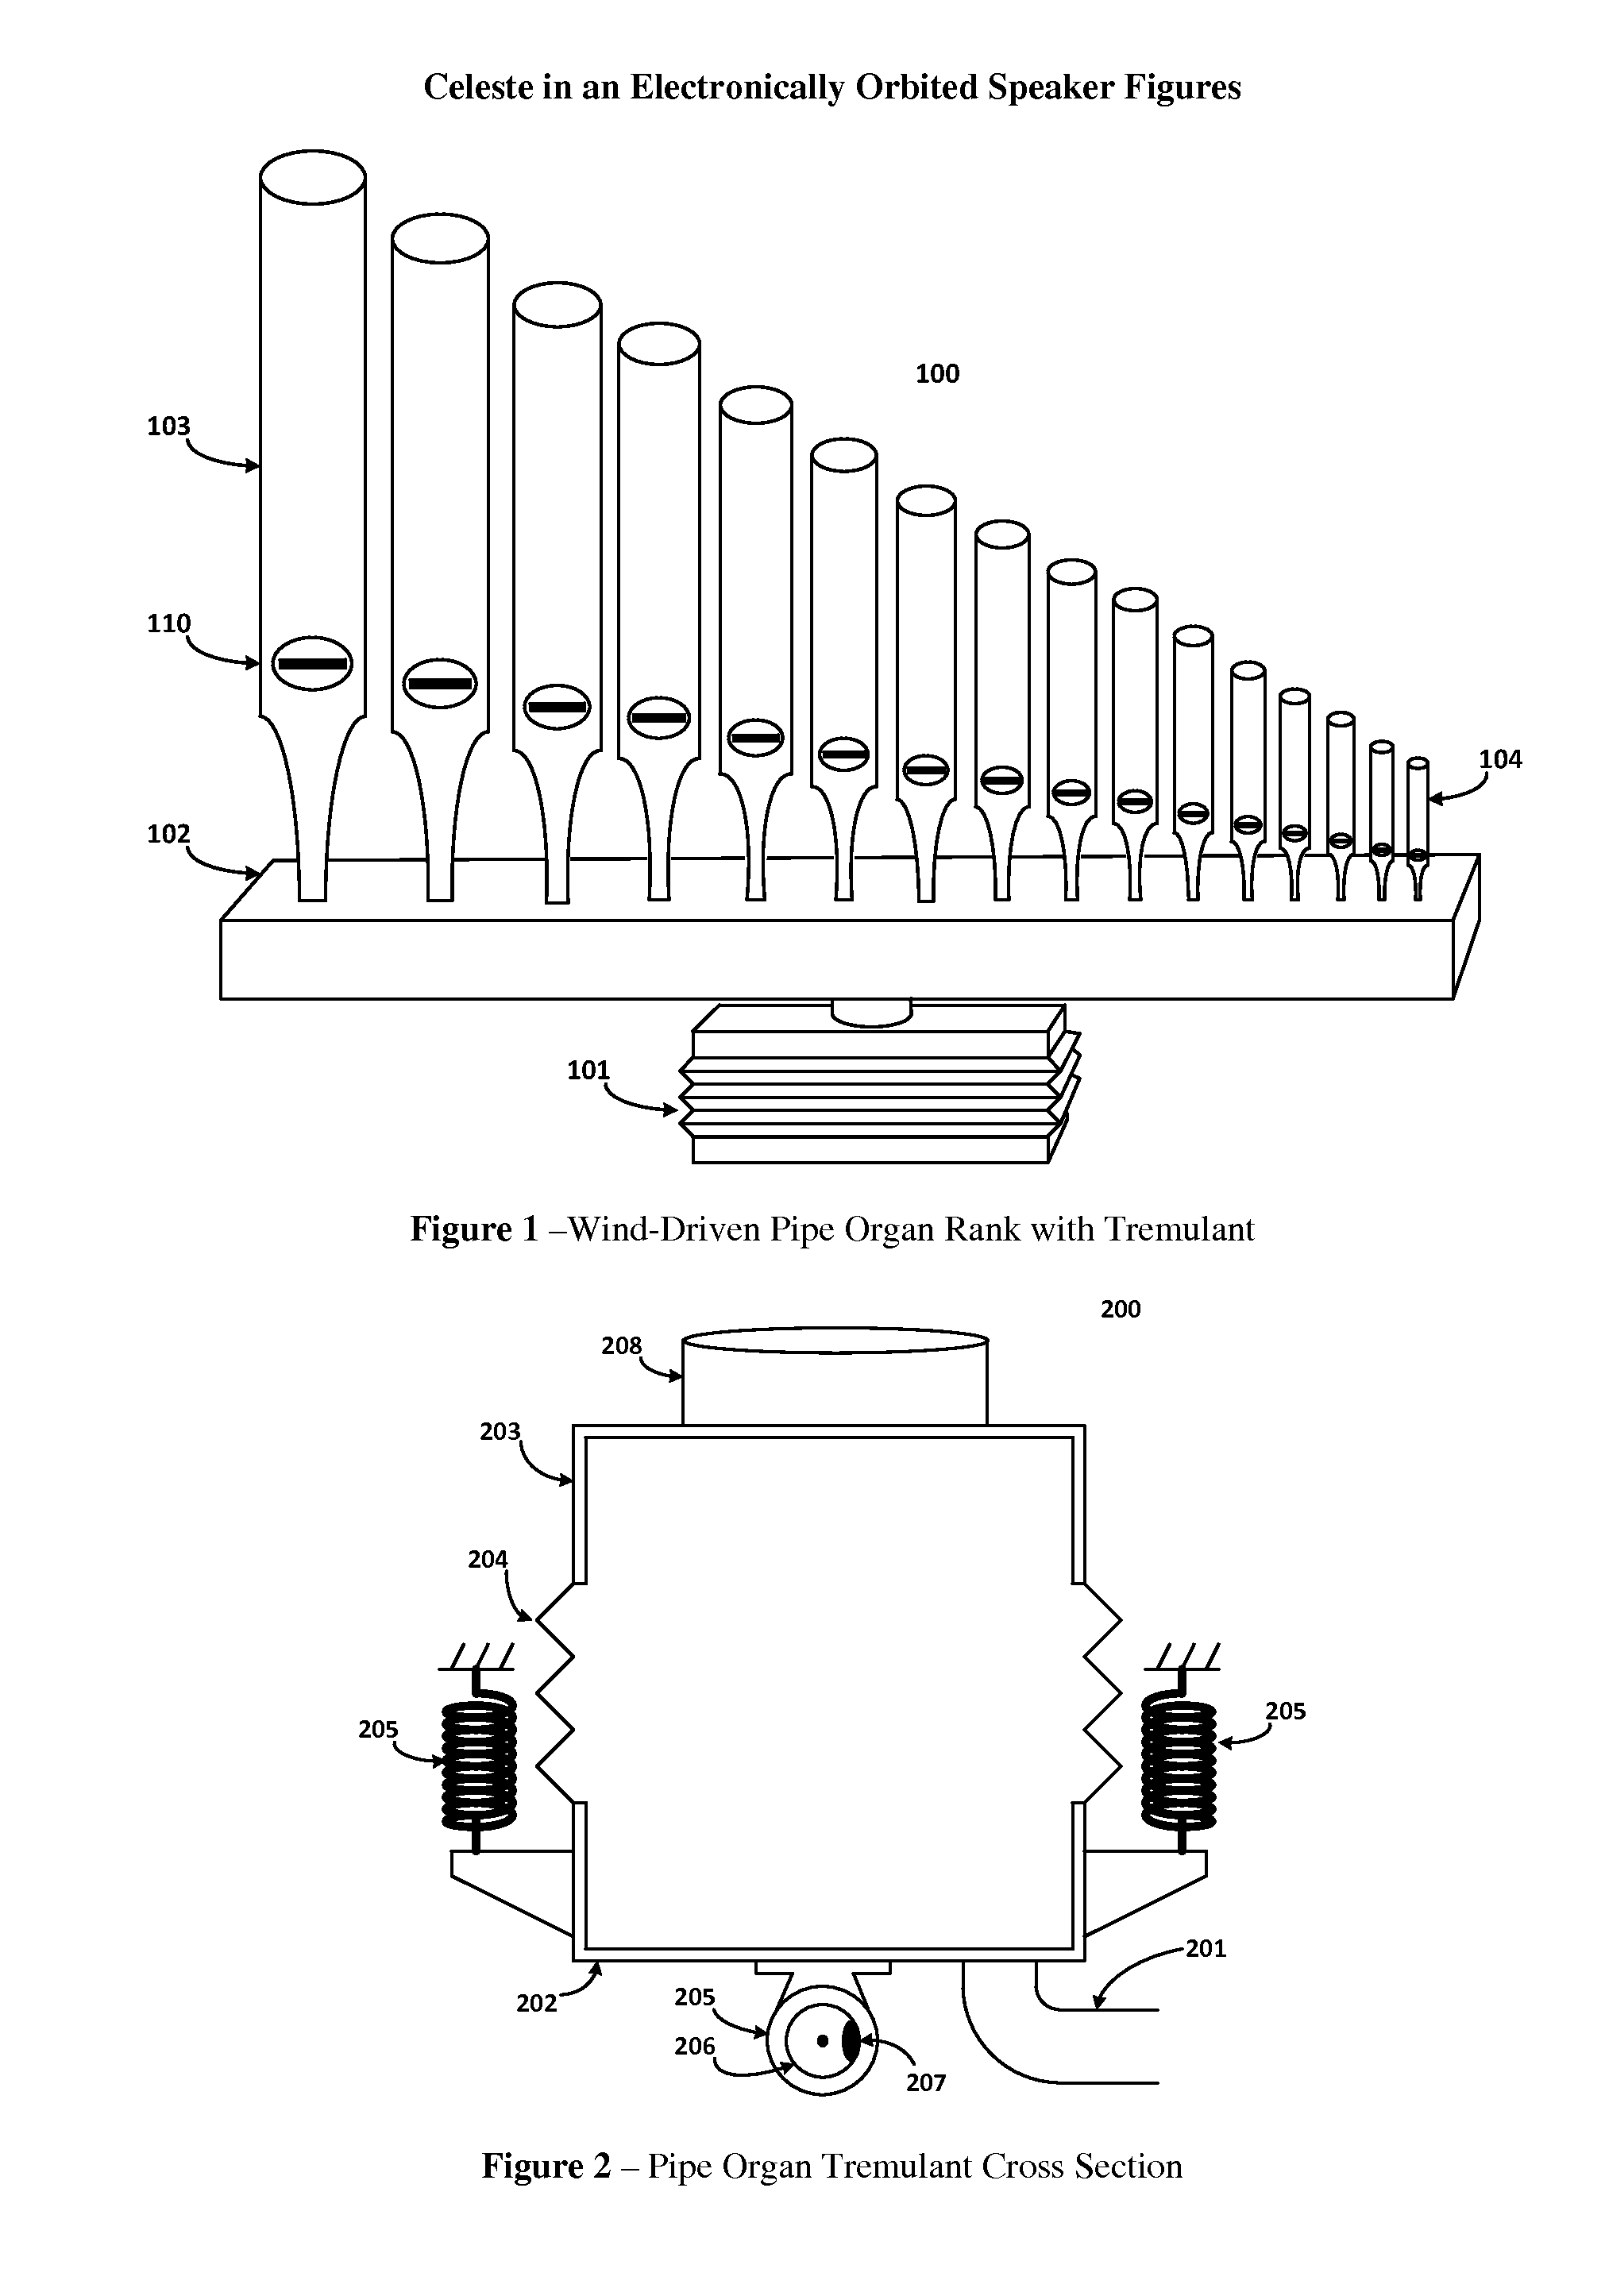 Apparatus and Method for a Celeste in an Electronically-Orbited Speaker